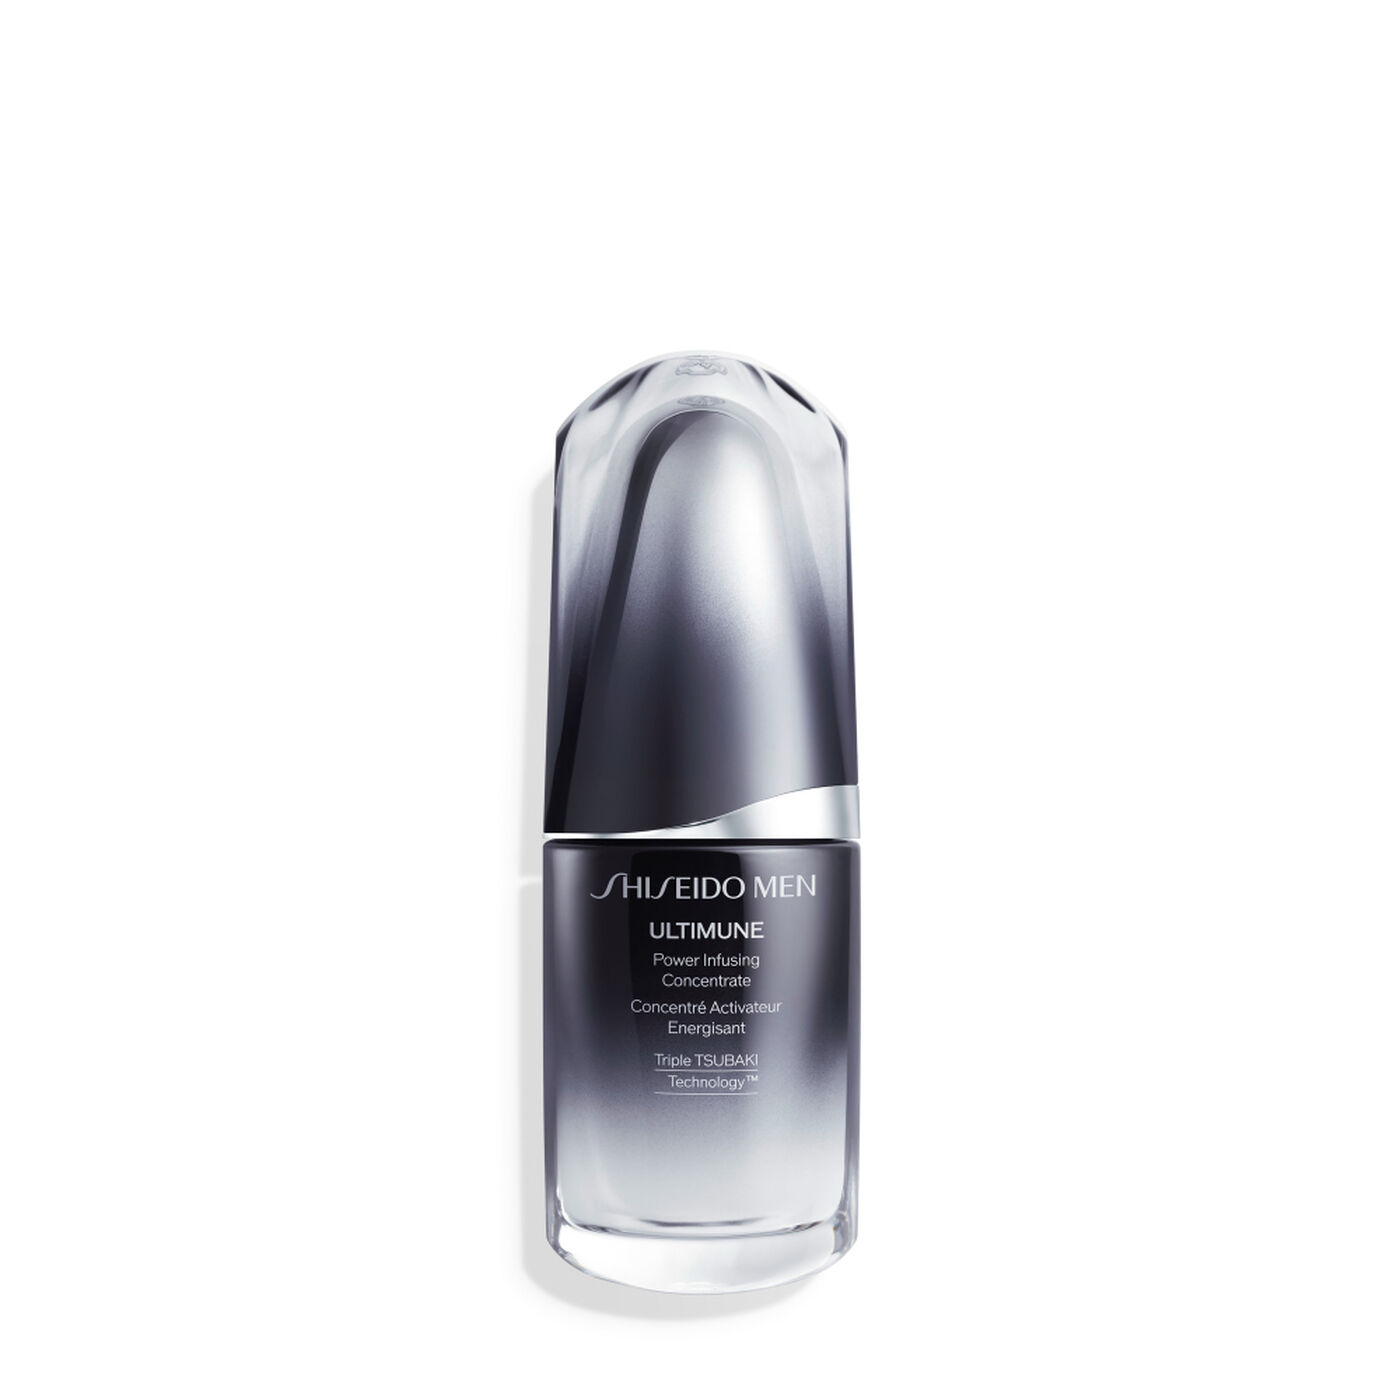 Shiseido-Ultimune Power Infusing Concentrate